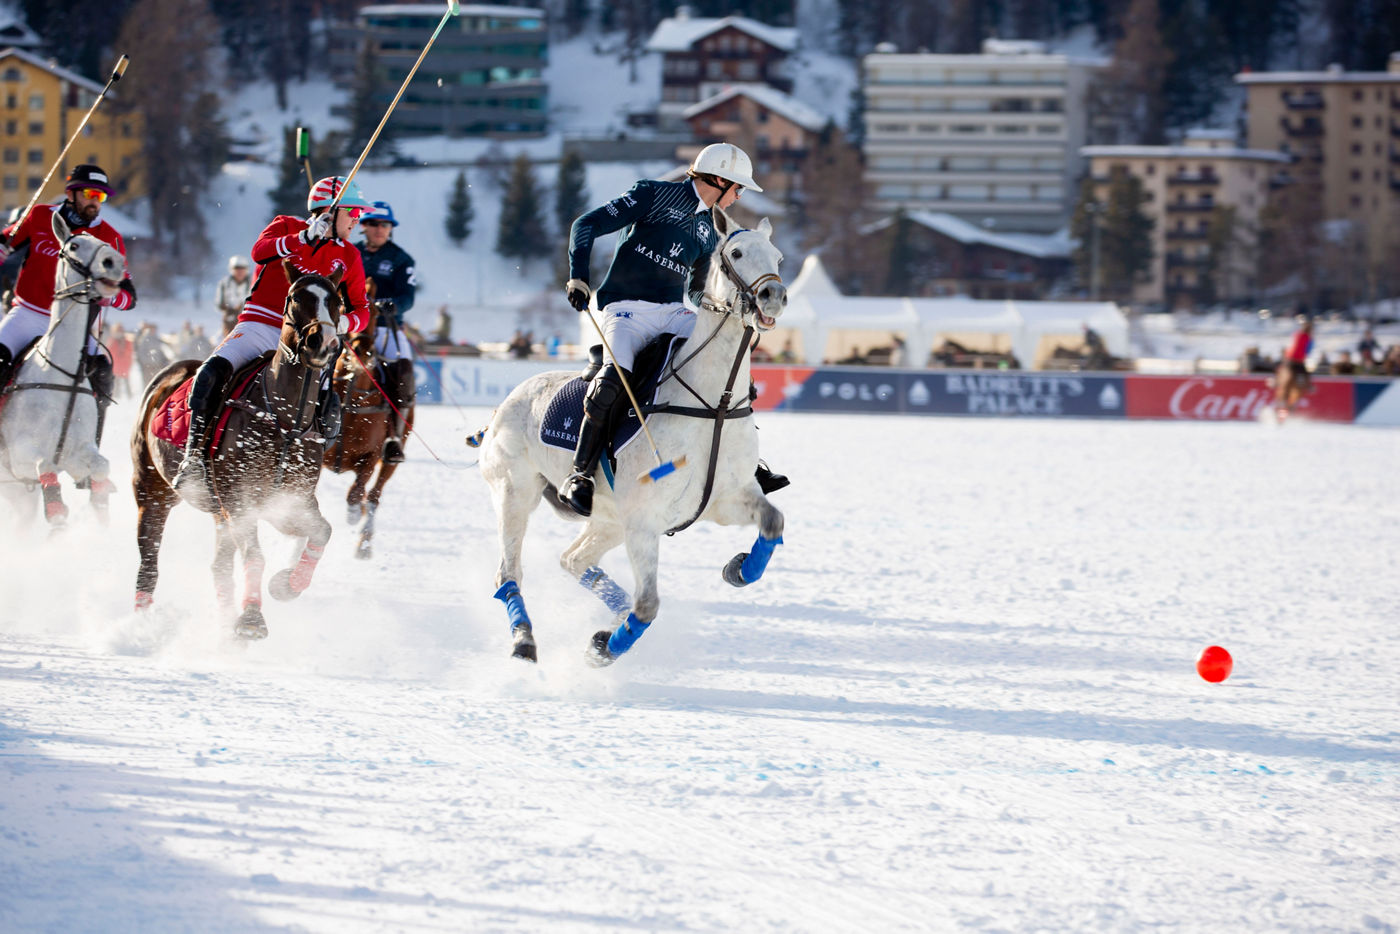 Moments-from-the-Snow-POlo-World-Cup-St